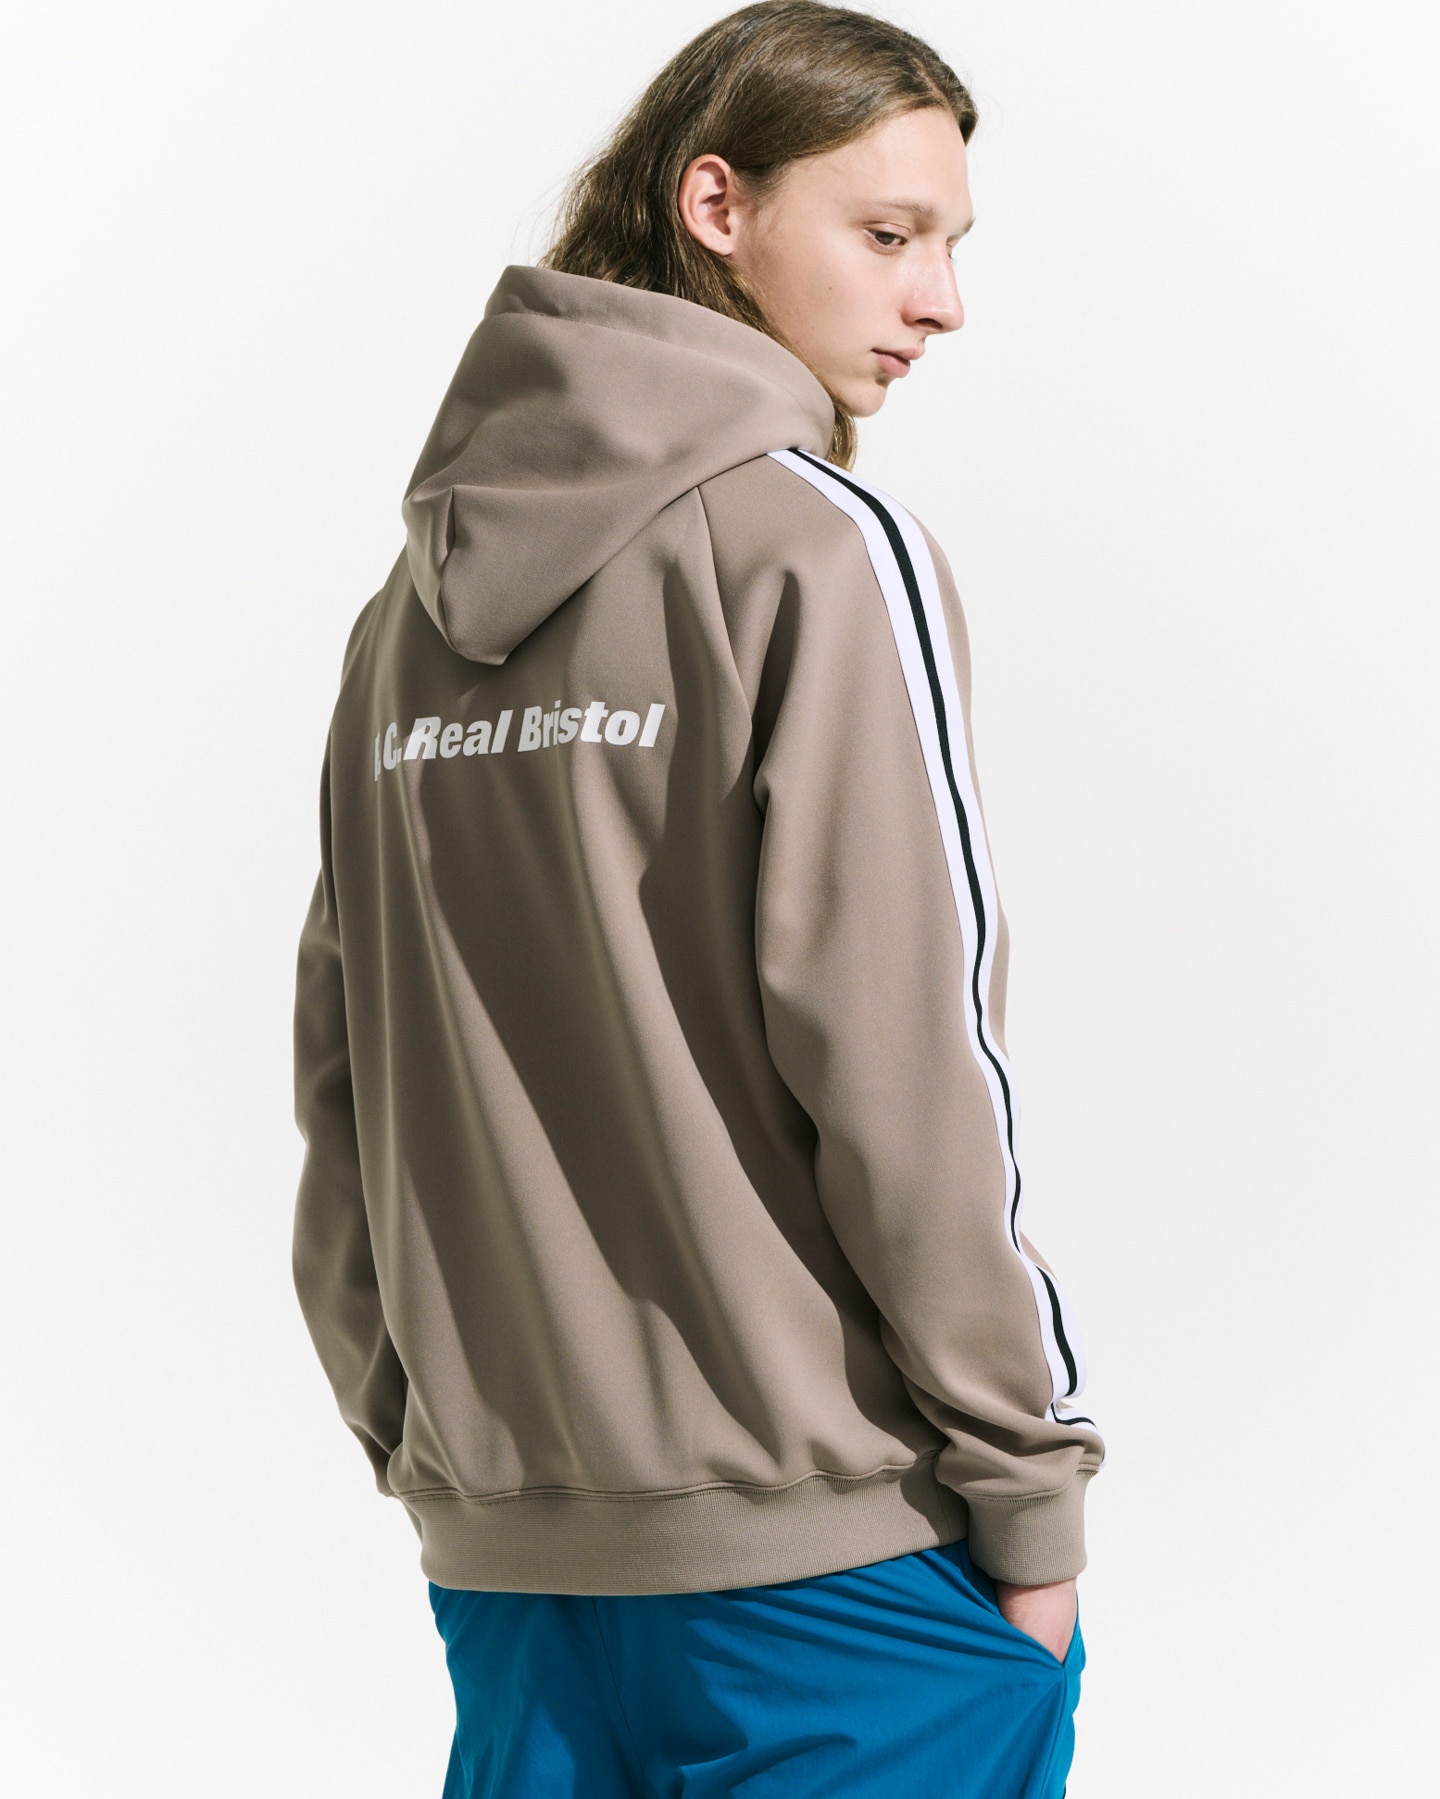 FCRB】23aw TRAINING TRACK JACKET-